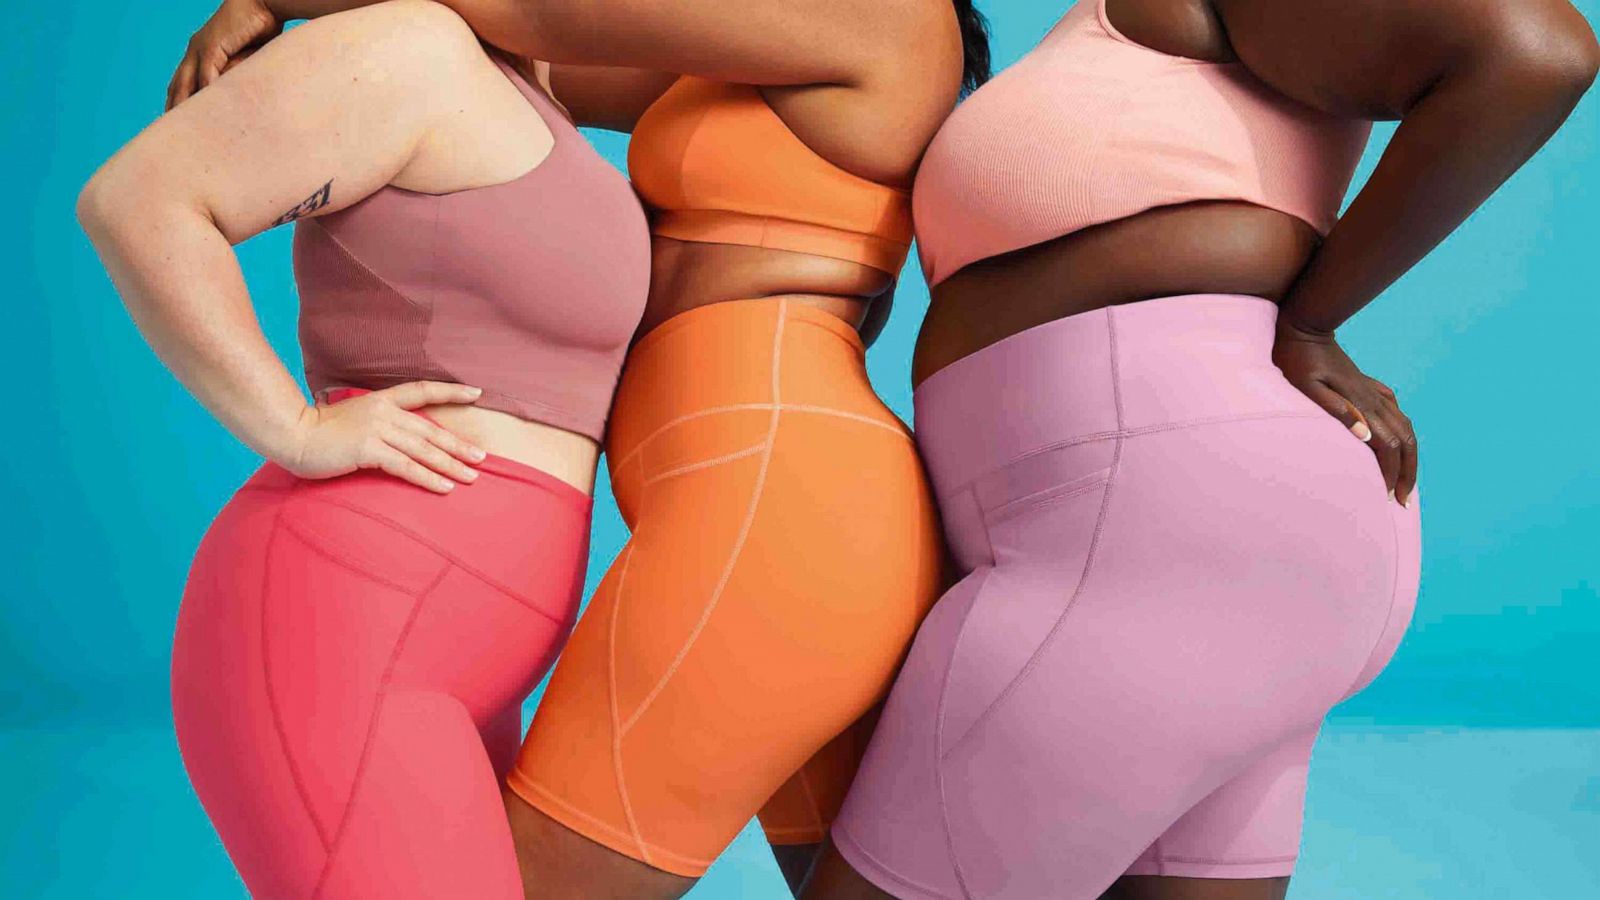 Old Navy unveils its most diverse sizing ever by offering every style in  every size - Good Morning America